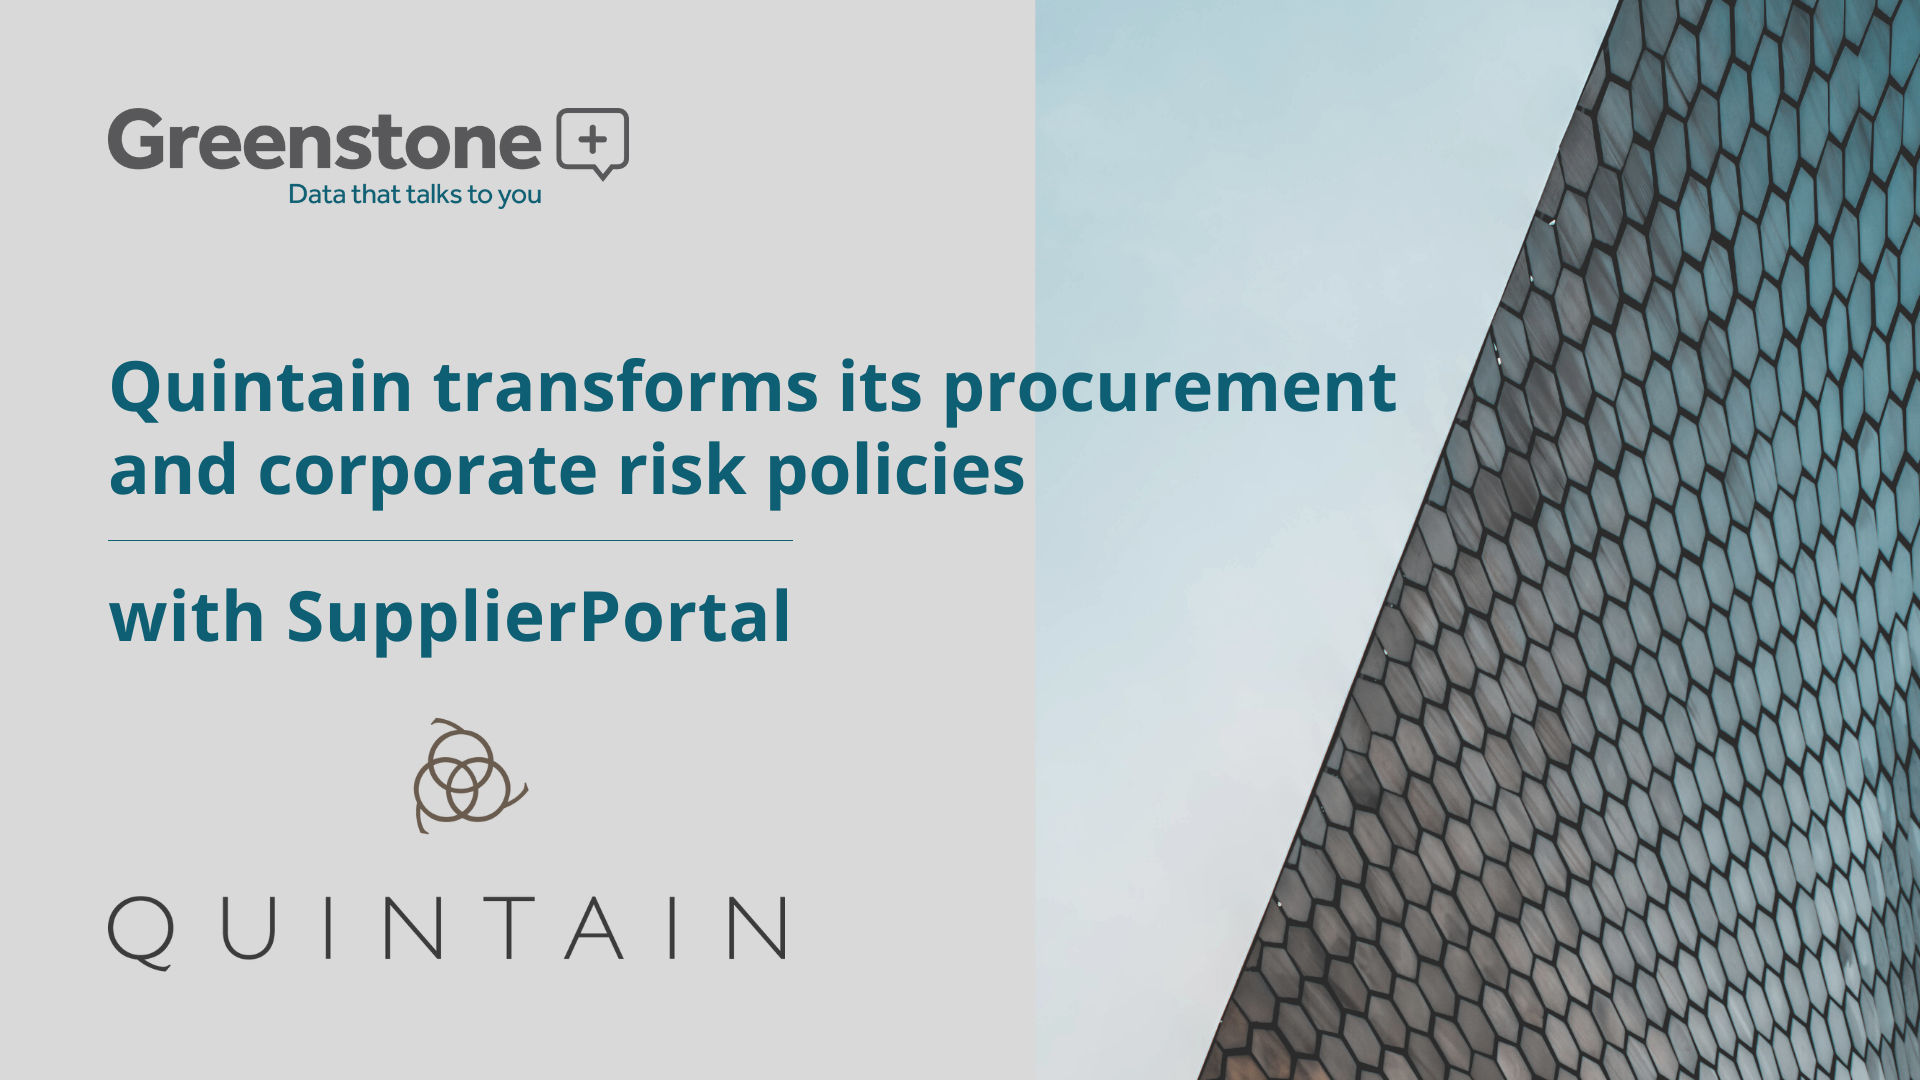 Quintain transforms its procurement and corporate risk policies with SupplierPortal